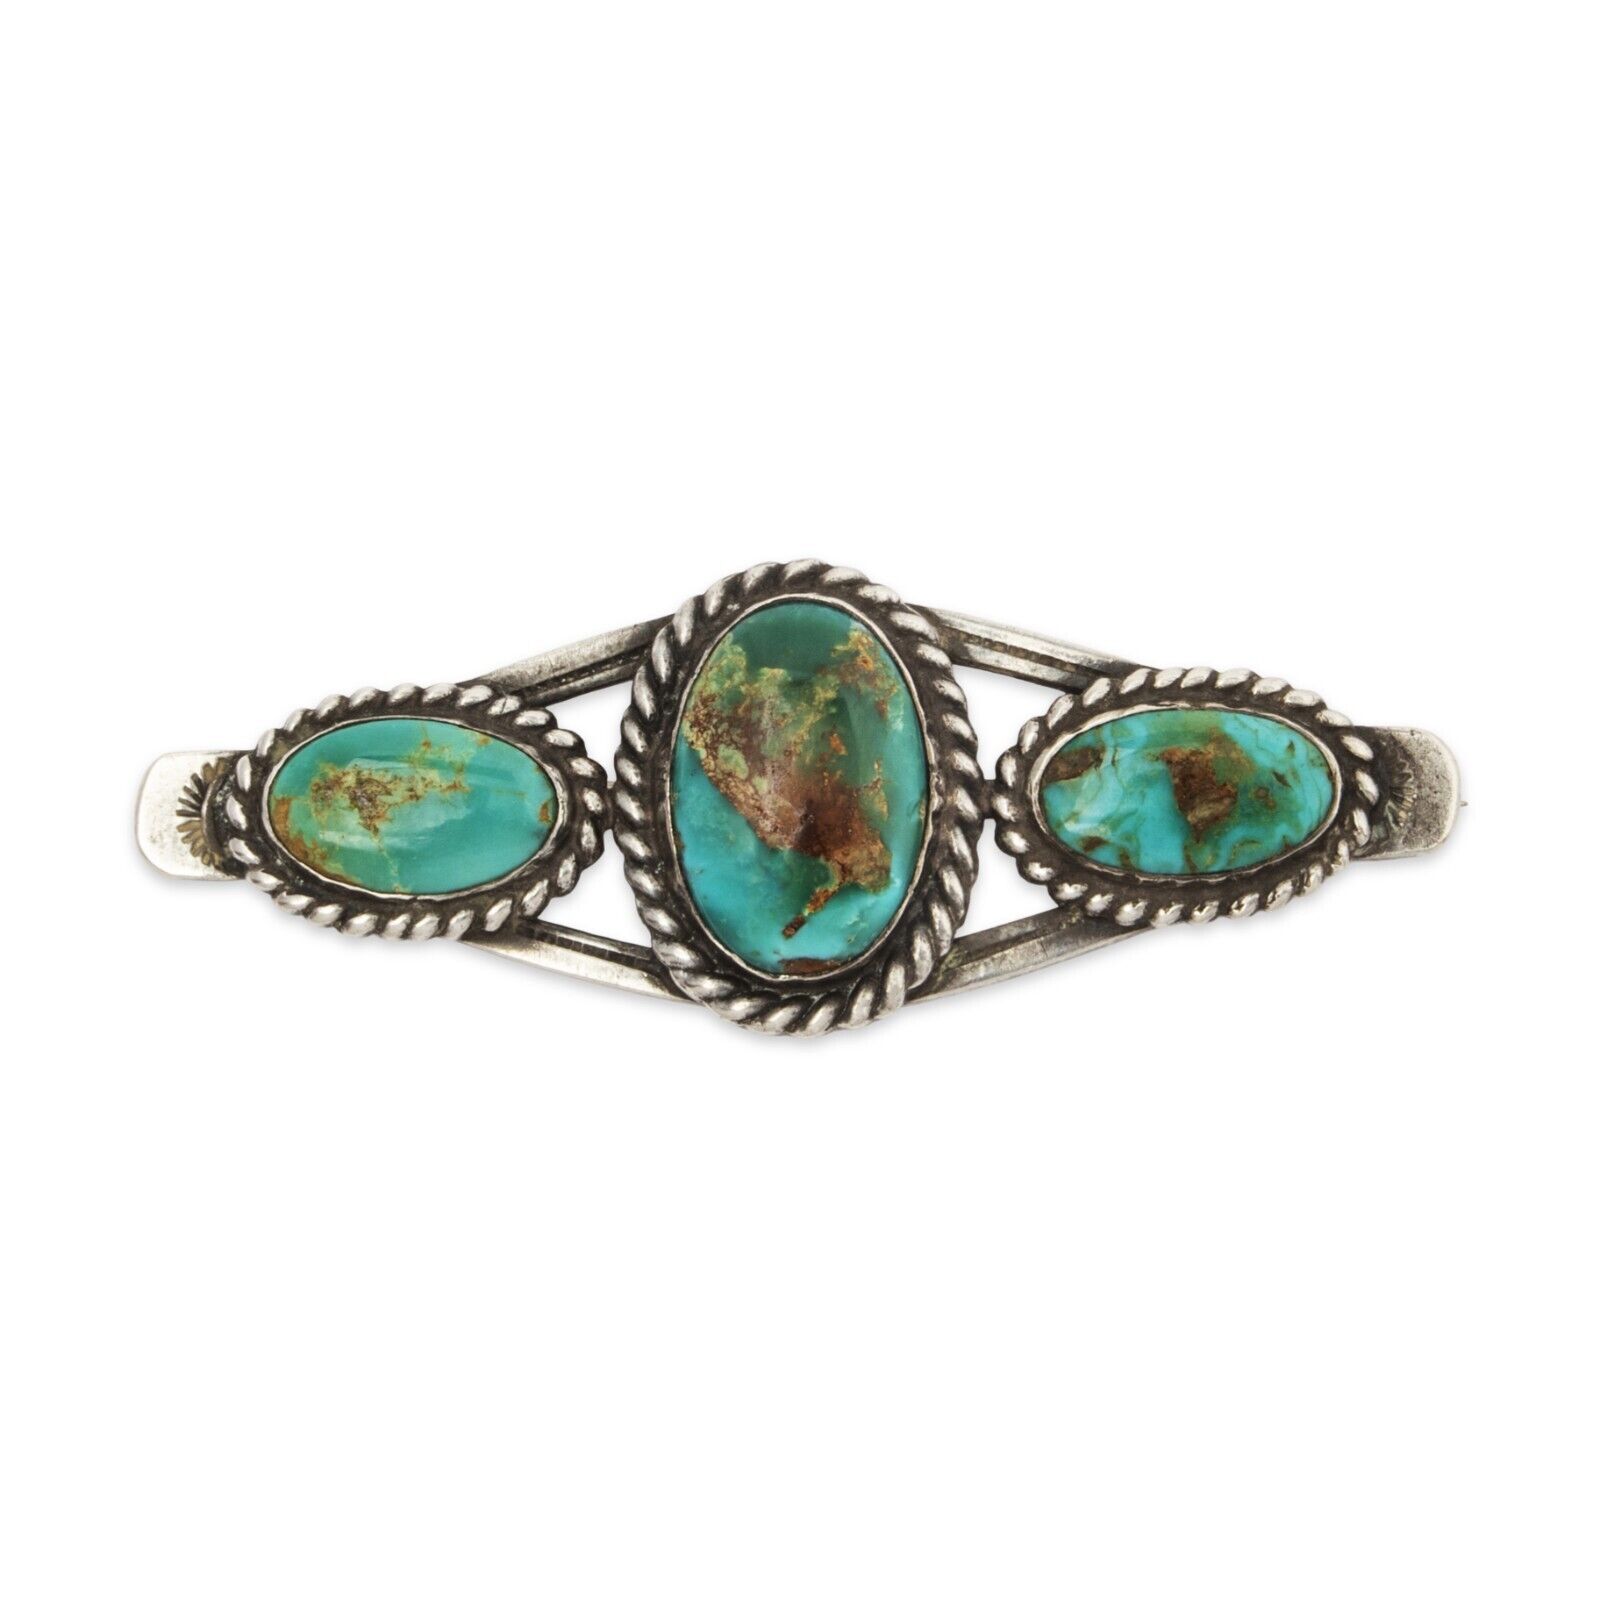 NATIVE AMERICAN OLD PAWN STERLING SILVER GREEN TURQUOISE PIN / BROOCH